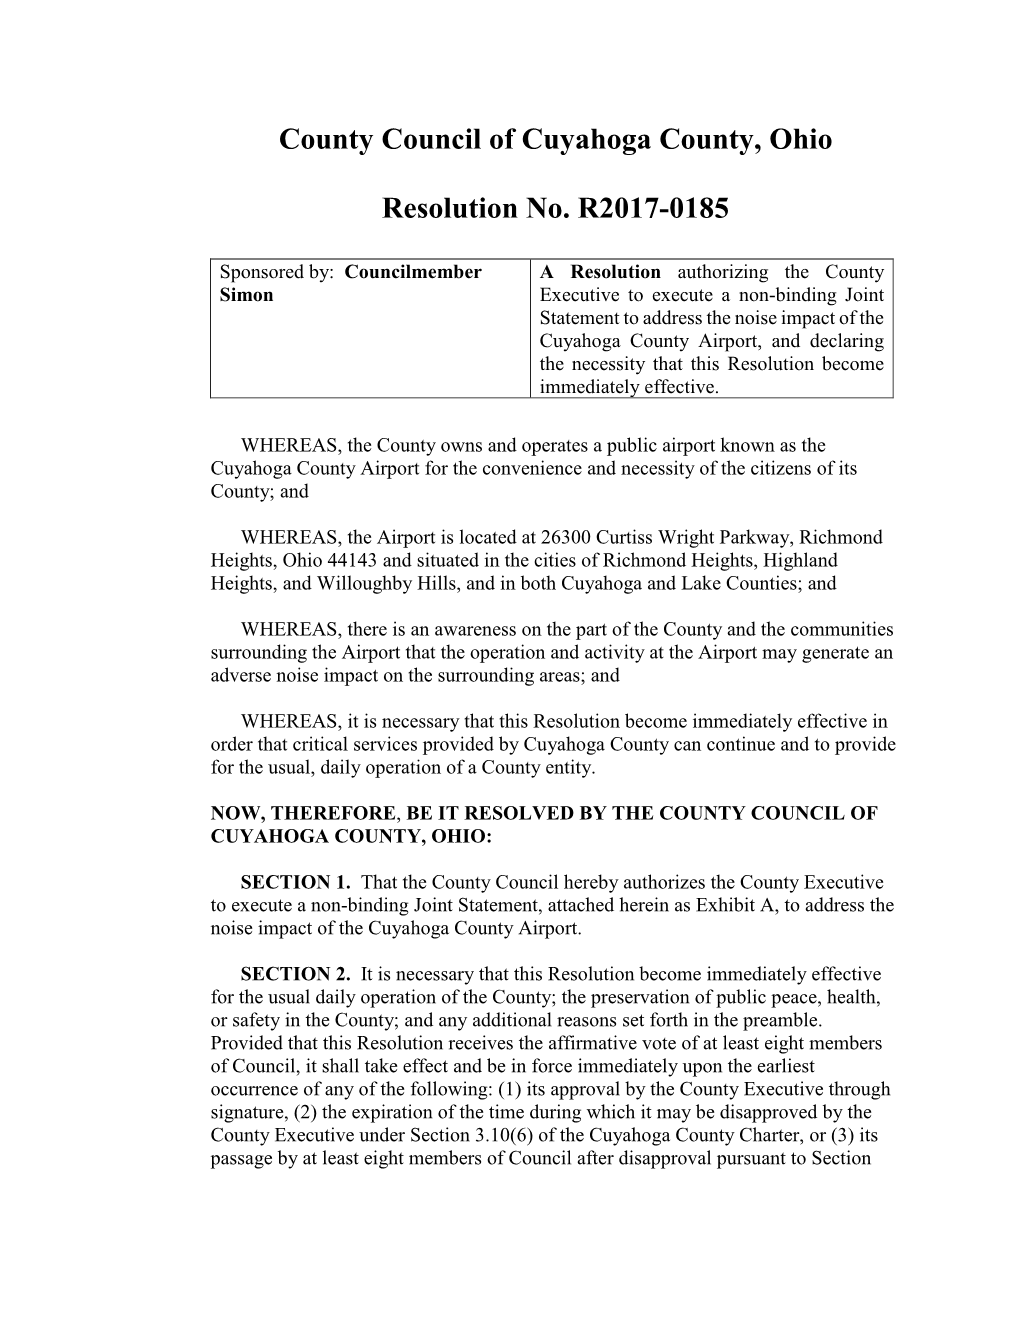 County Council of Cuyahoga County, Ohio Resolution No. R2017-0185